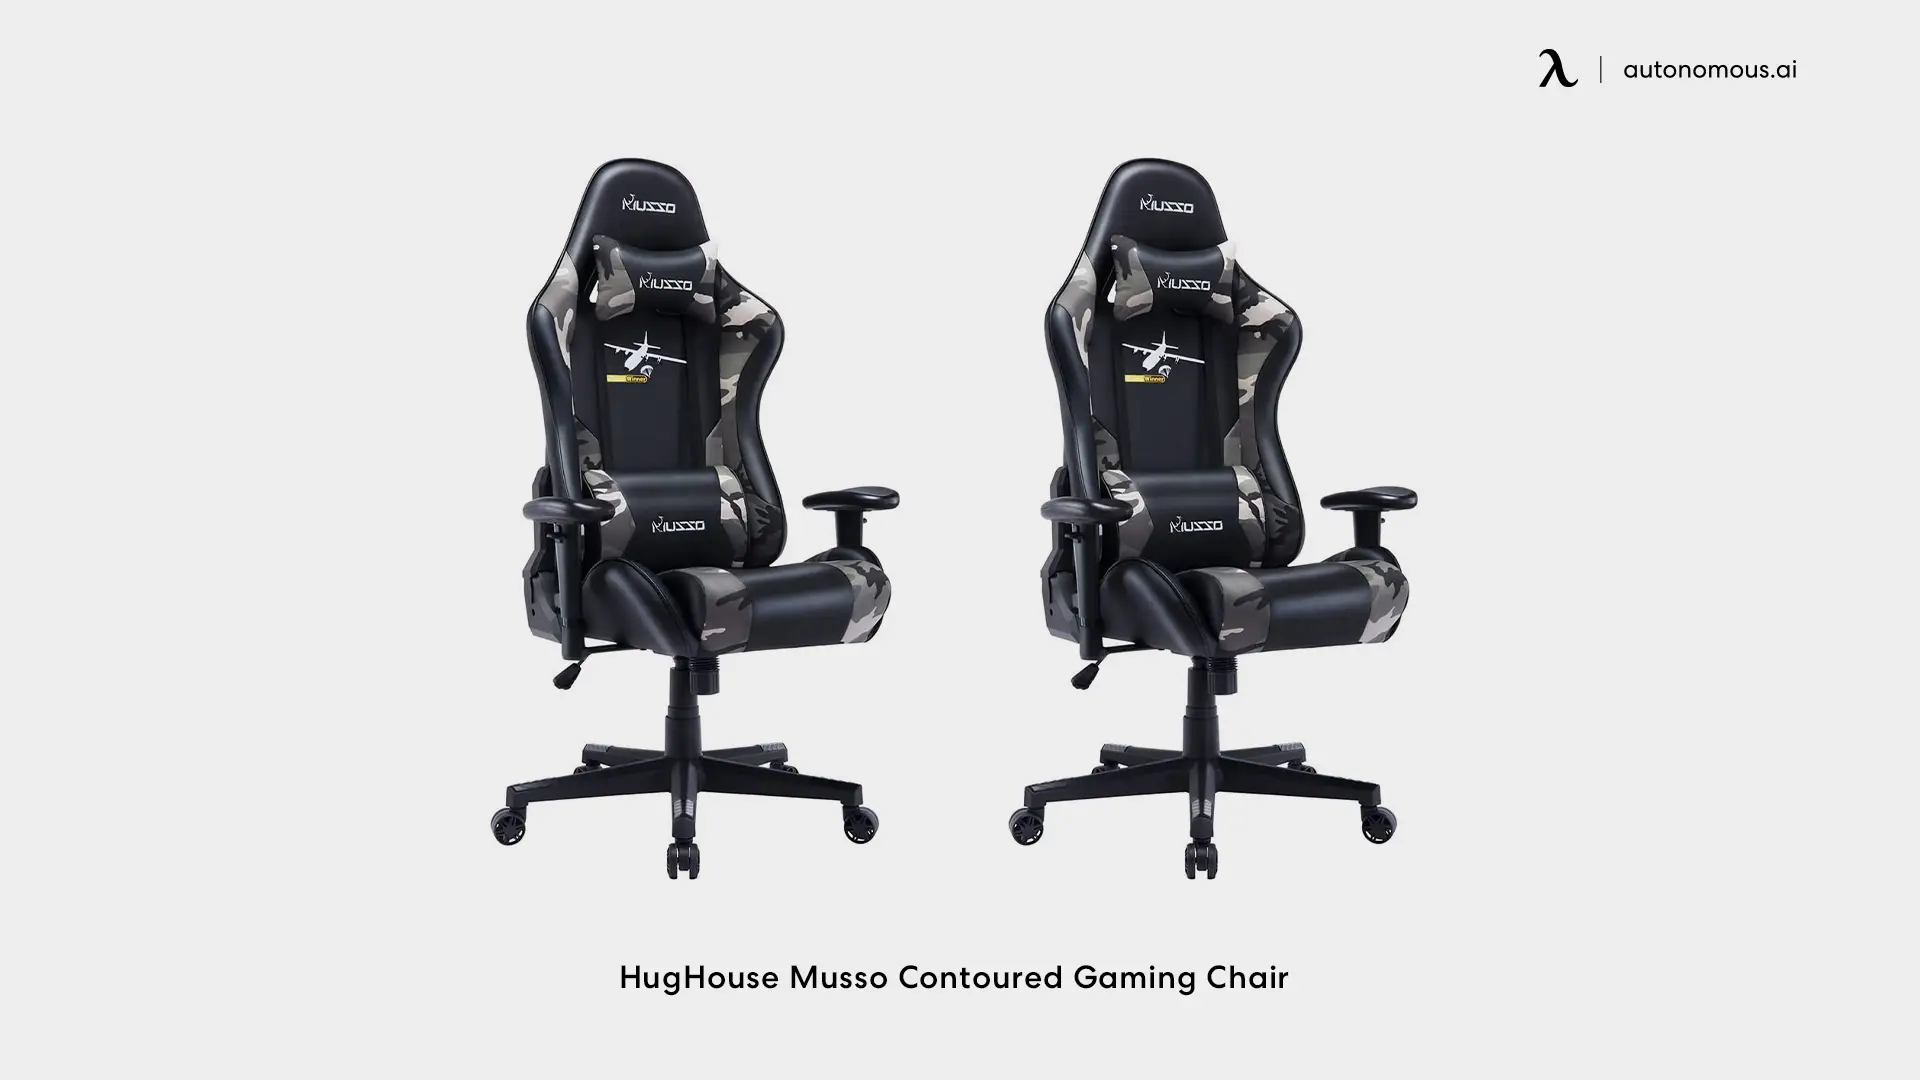 HugHouse Musso Contoured Gaming Chair